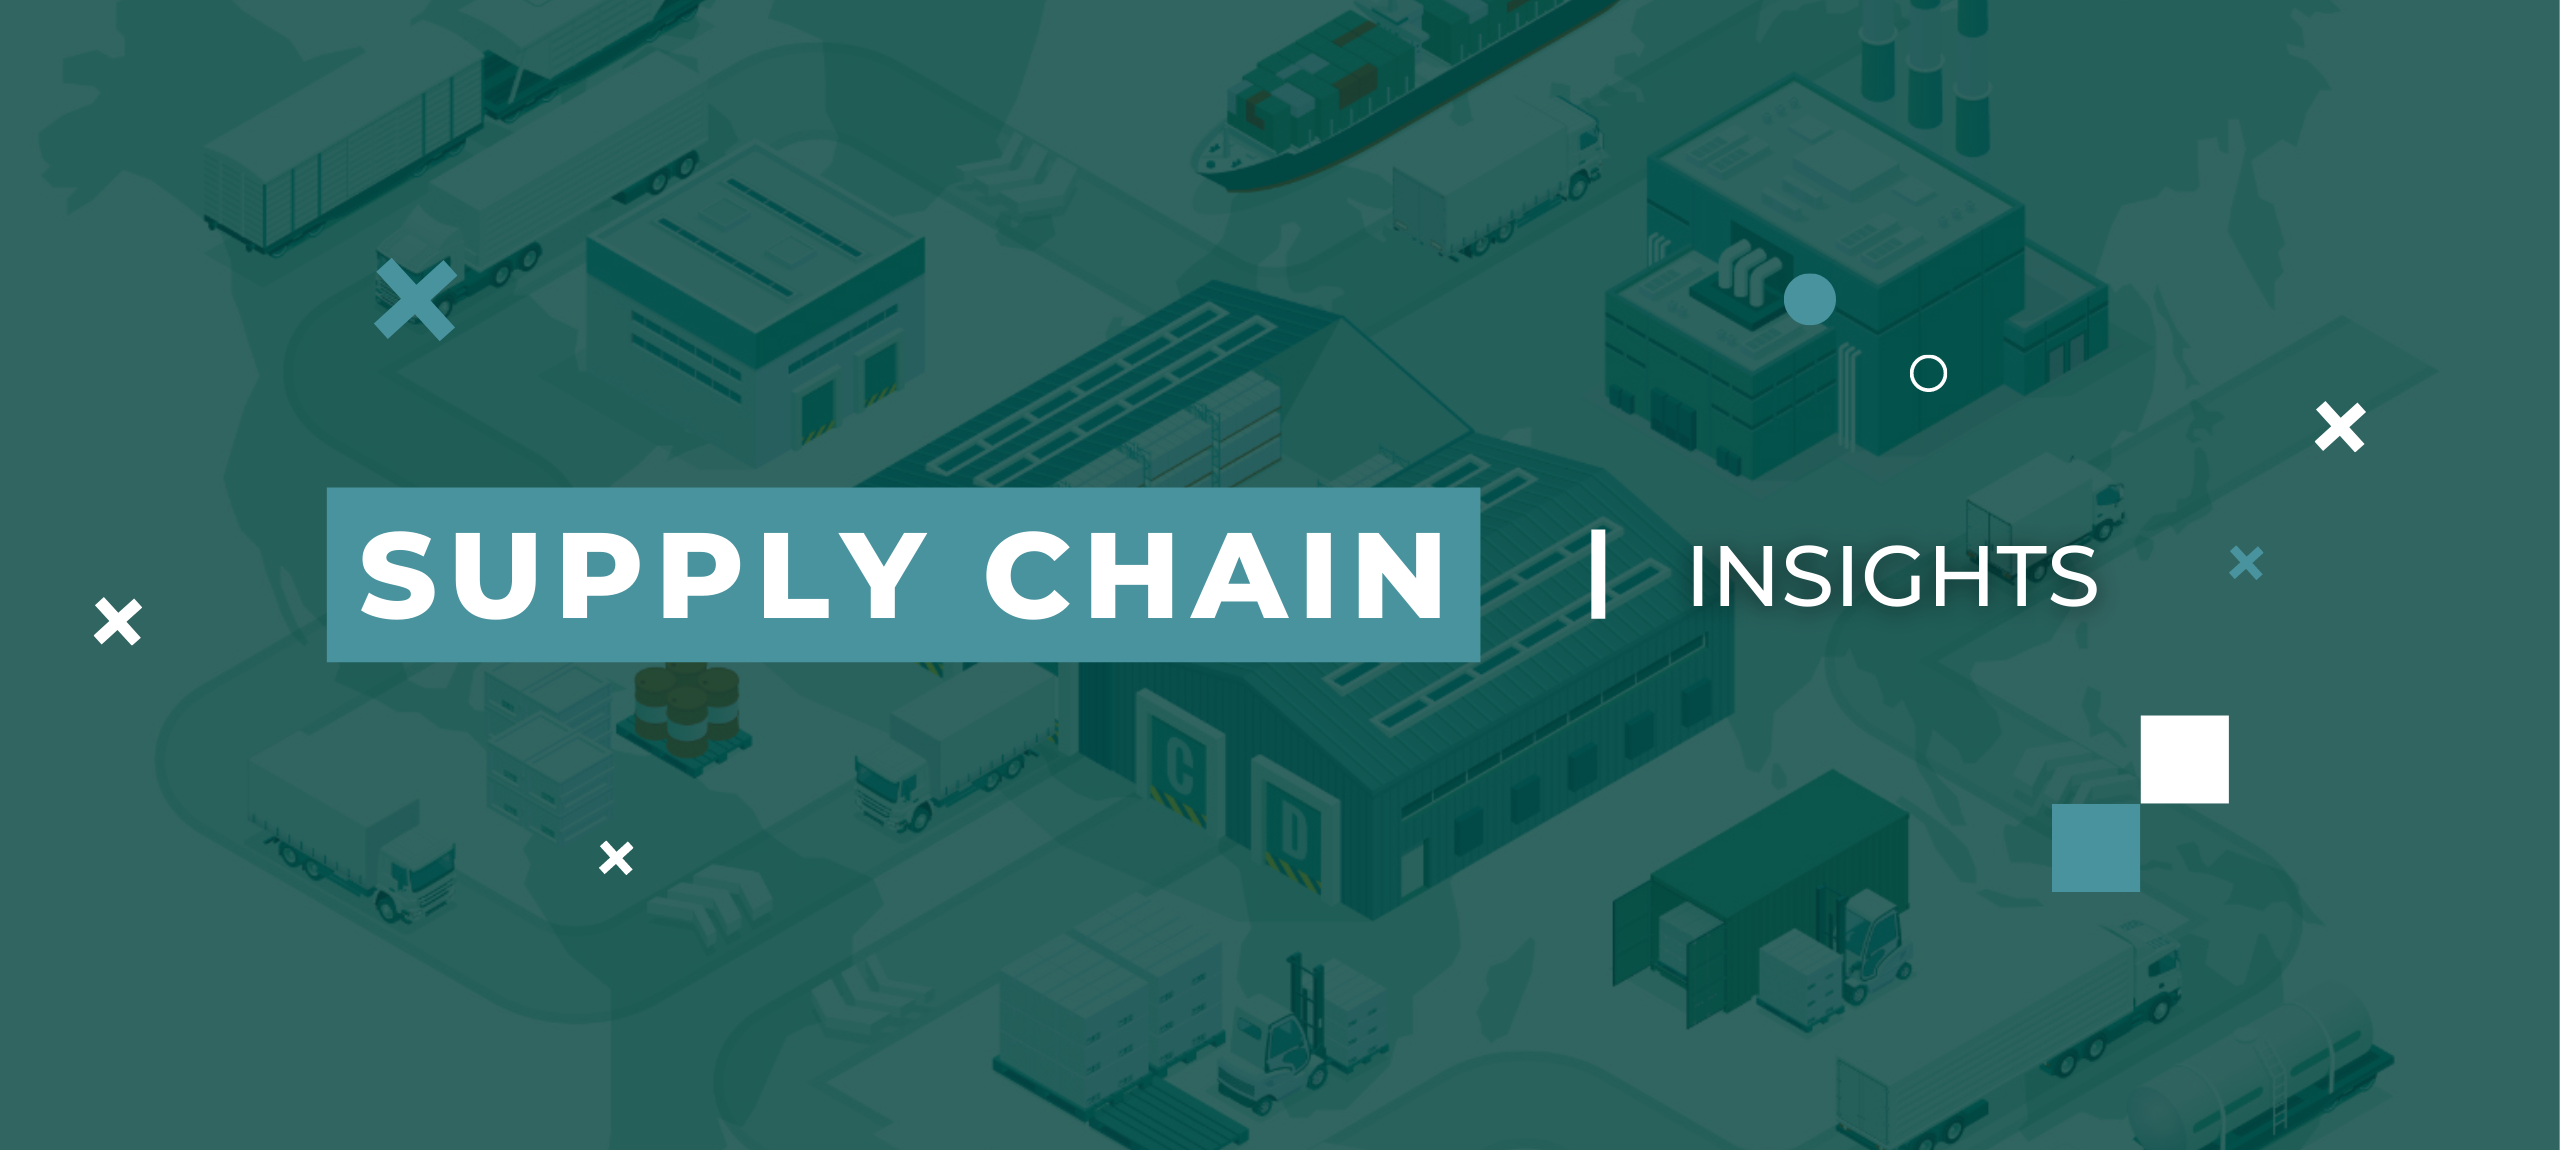 Supply Chain Insights Banner